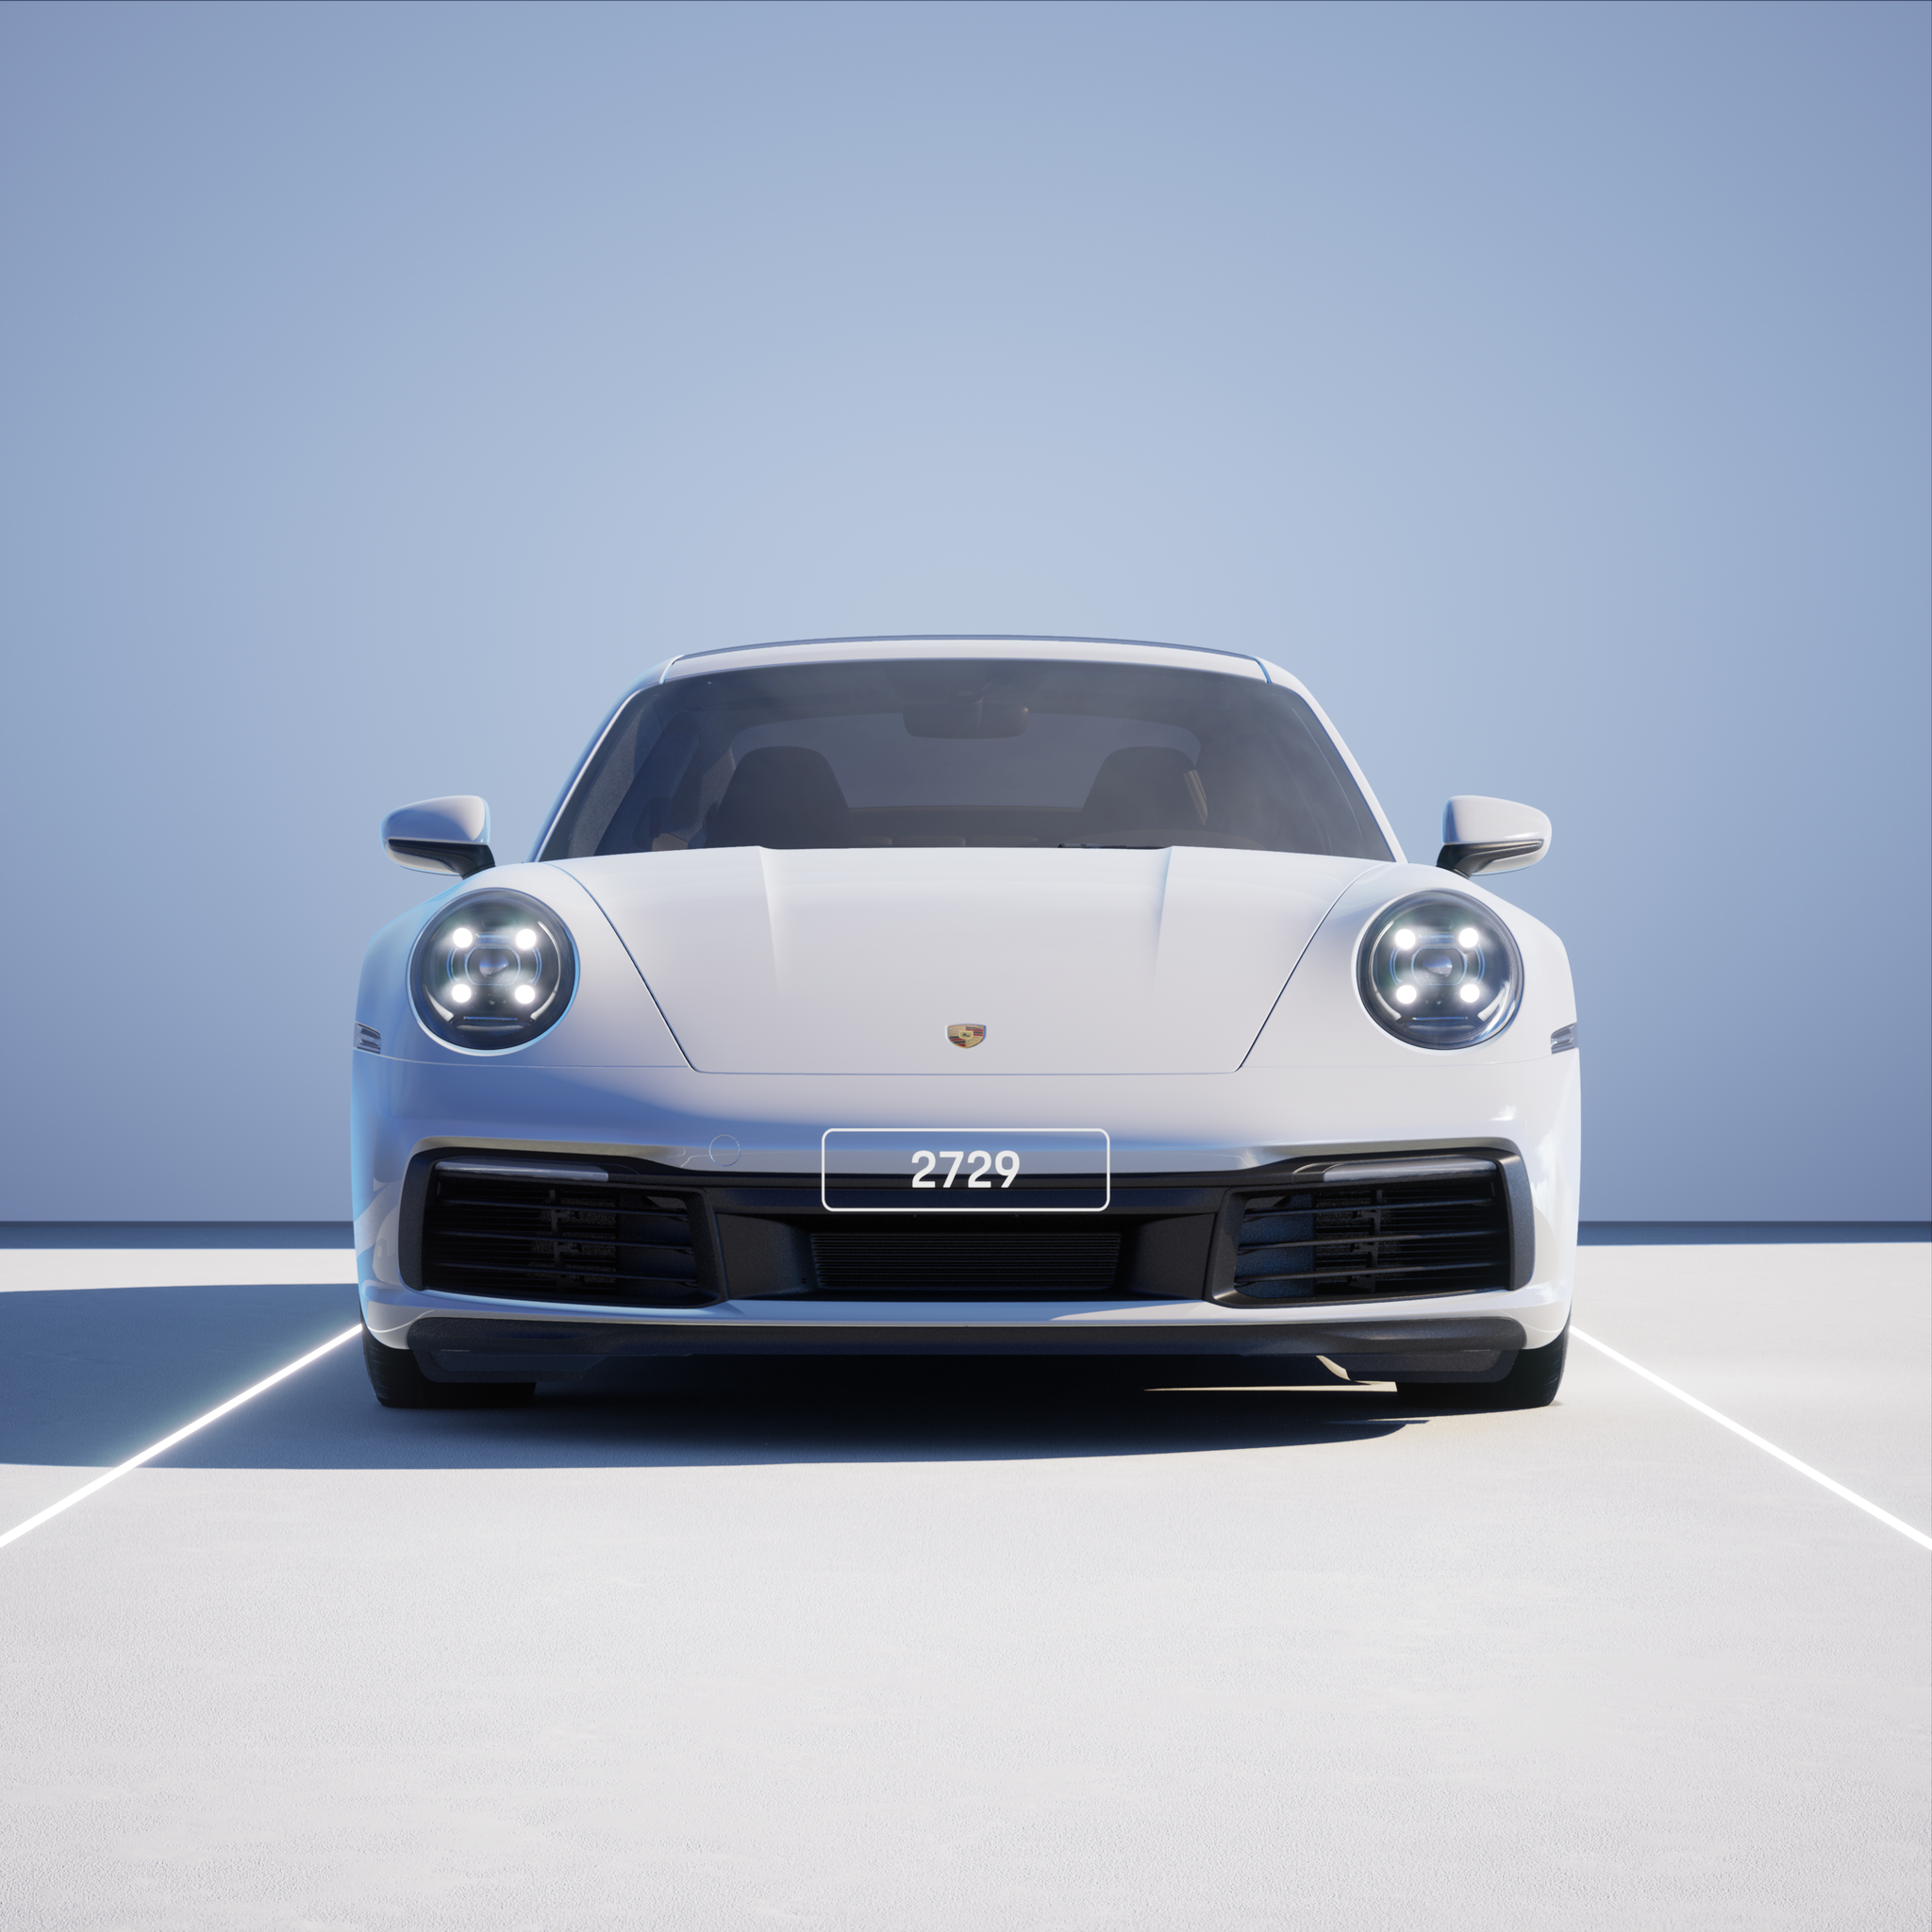 The PORSCHΞ 911 2729 image in phase